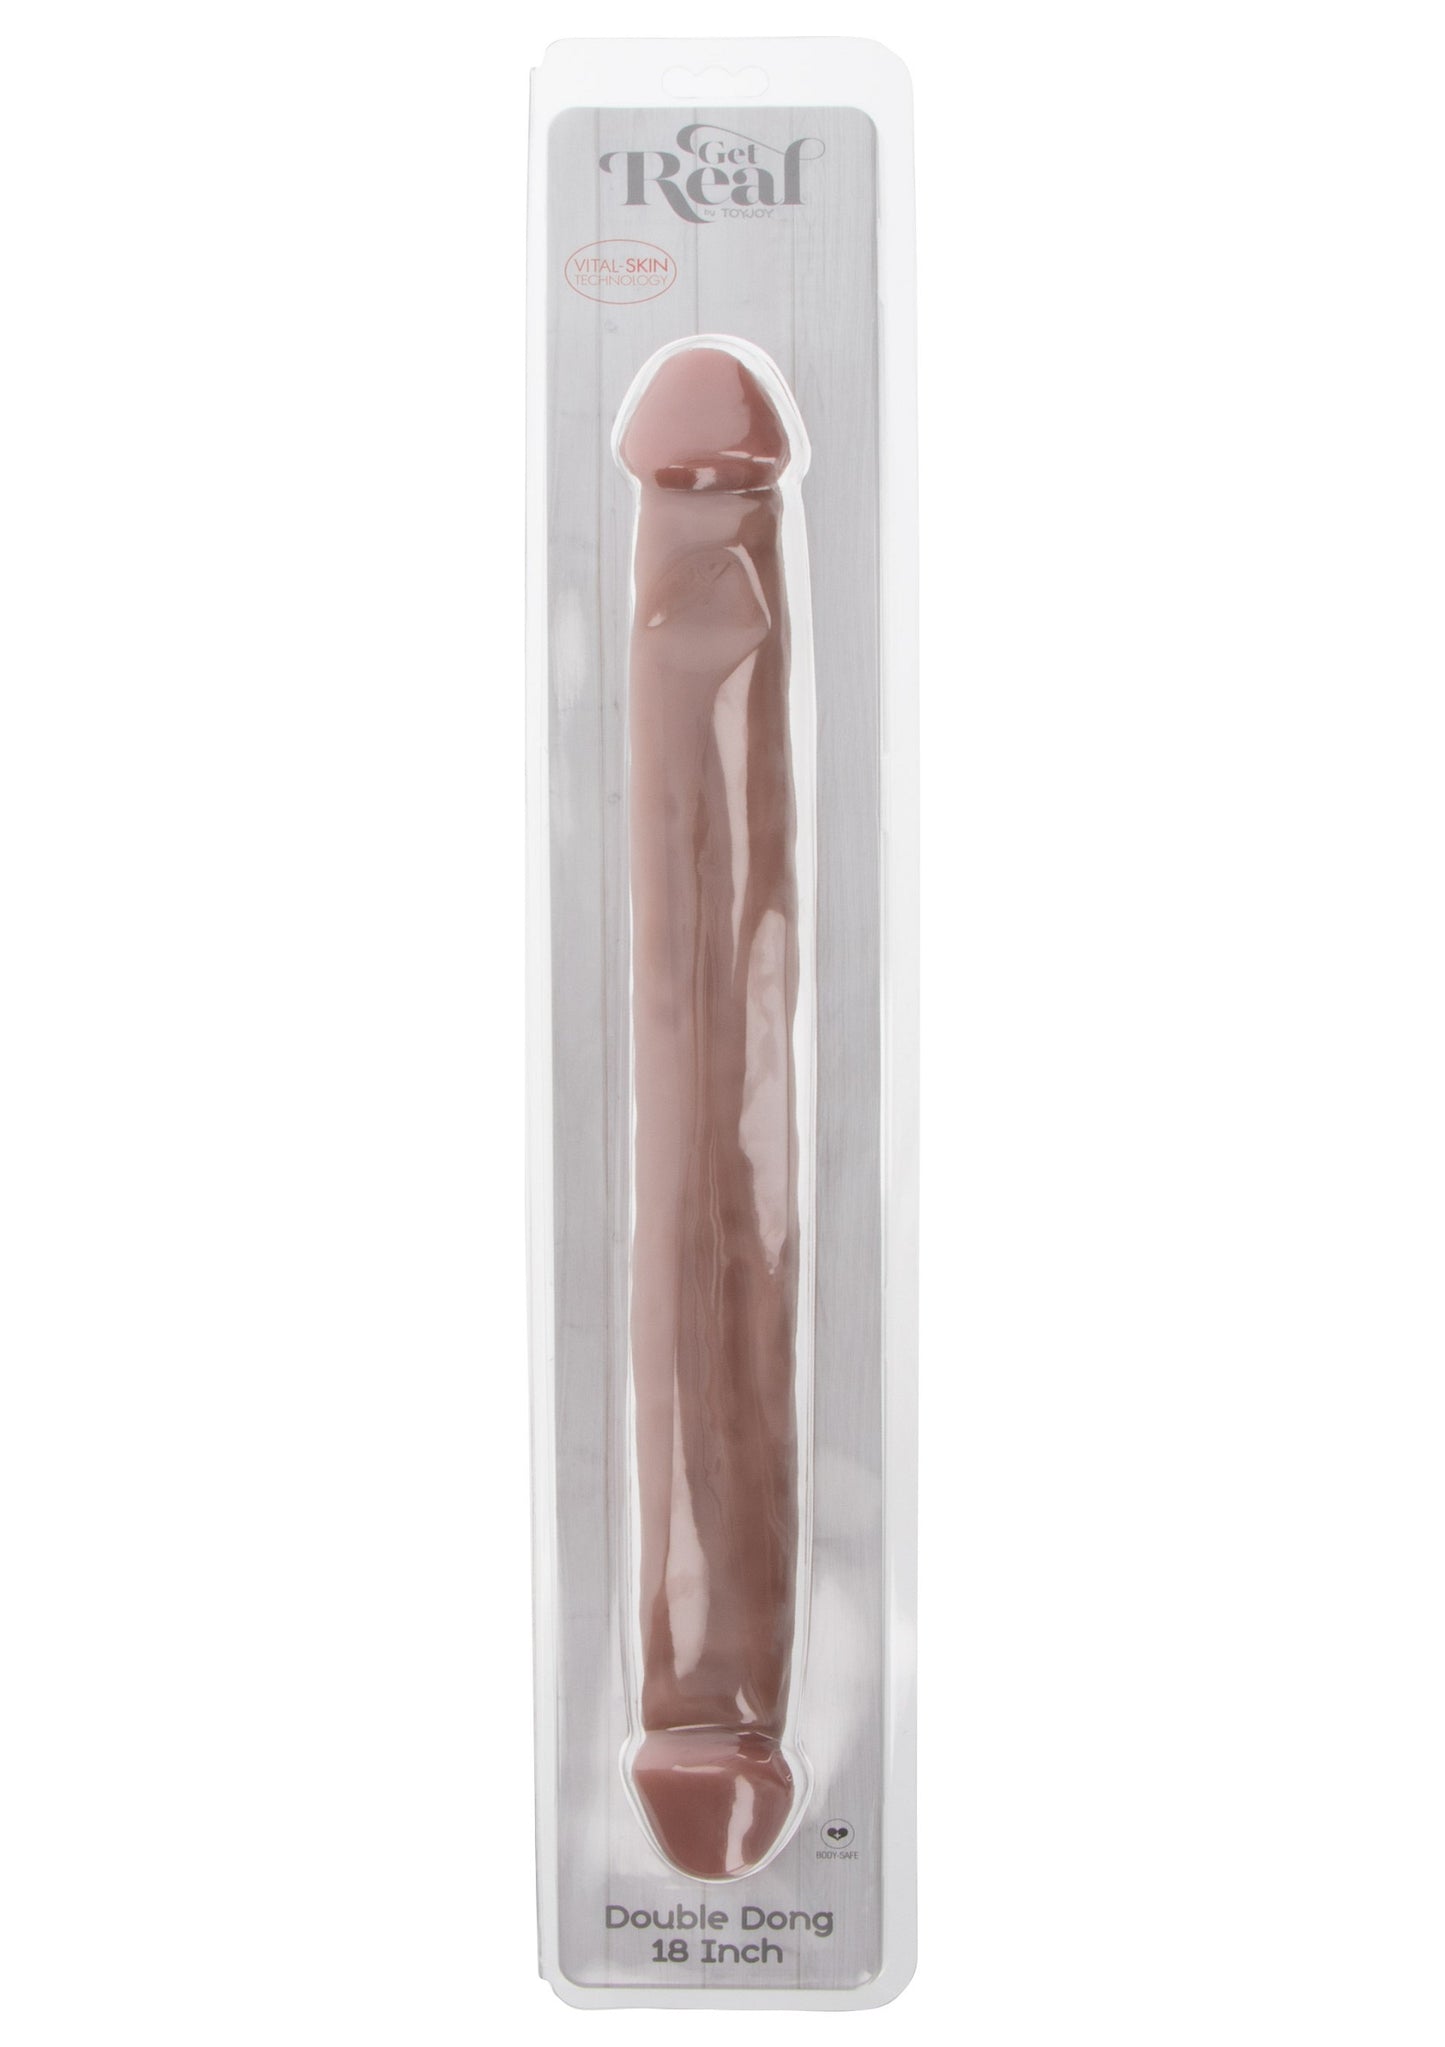 ToyJoy Get Real Double Dong 18' SKIN - 3